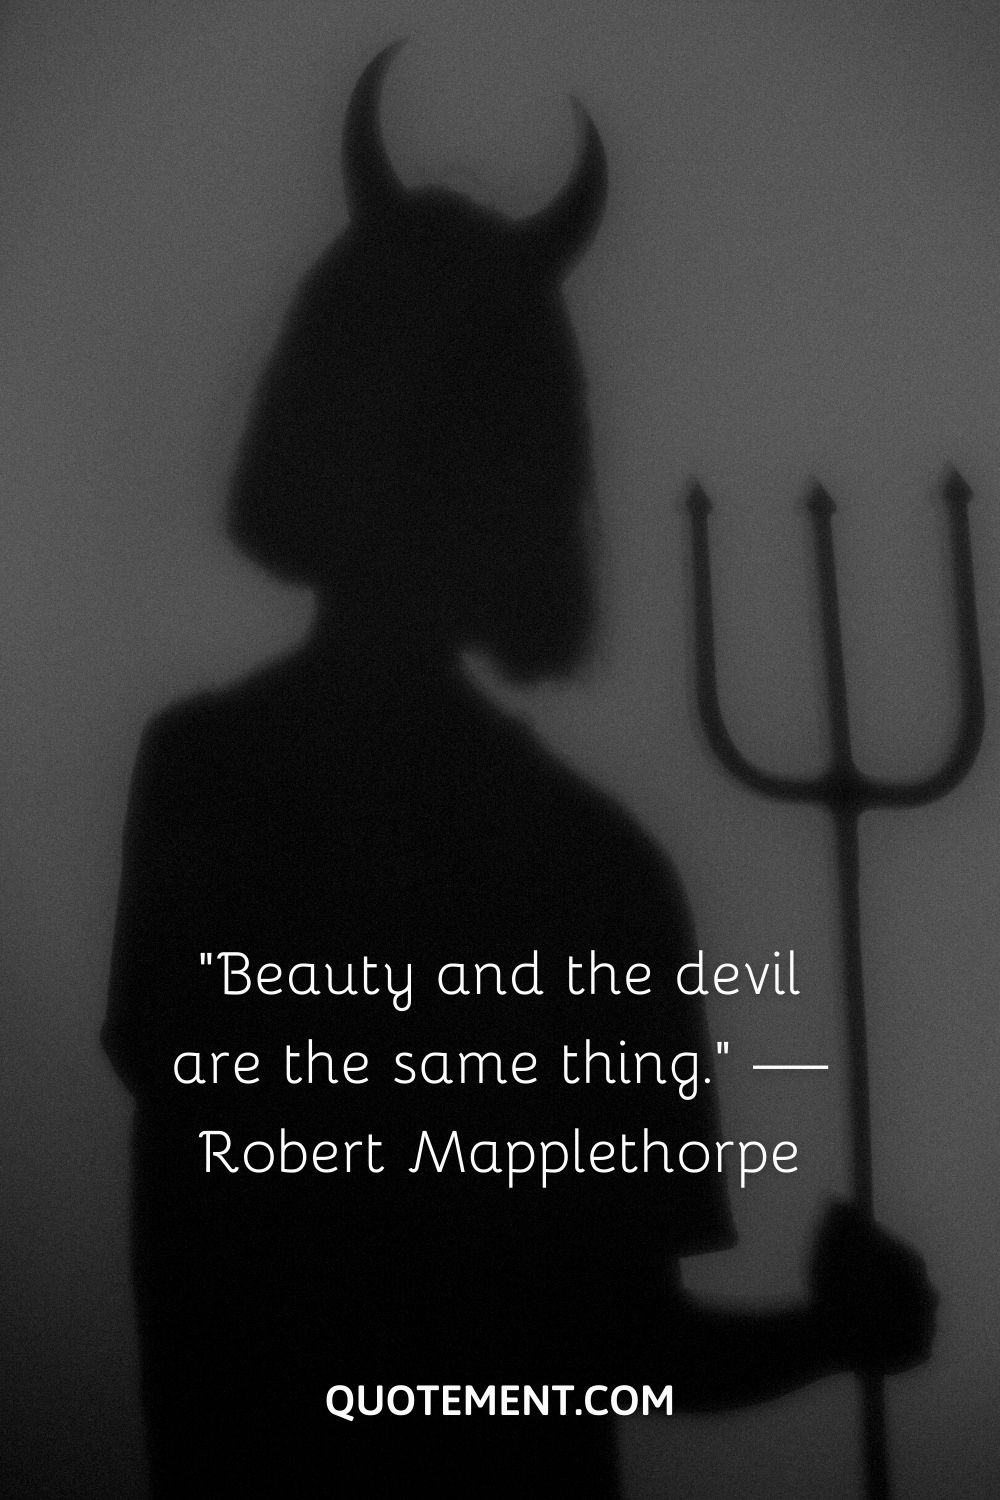 “Beauty and the devil are the same thing.” — Robert Mapplethorpe